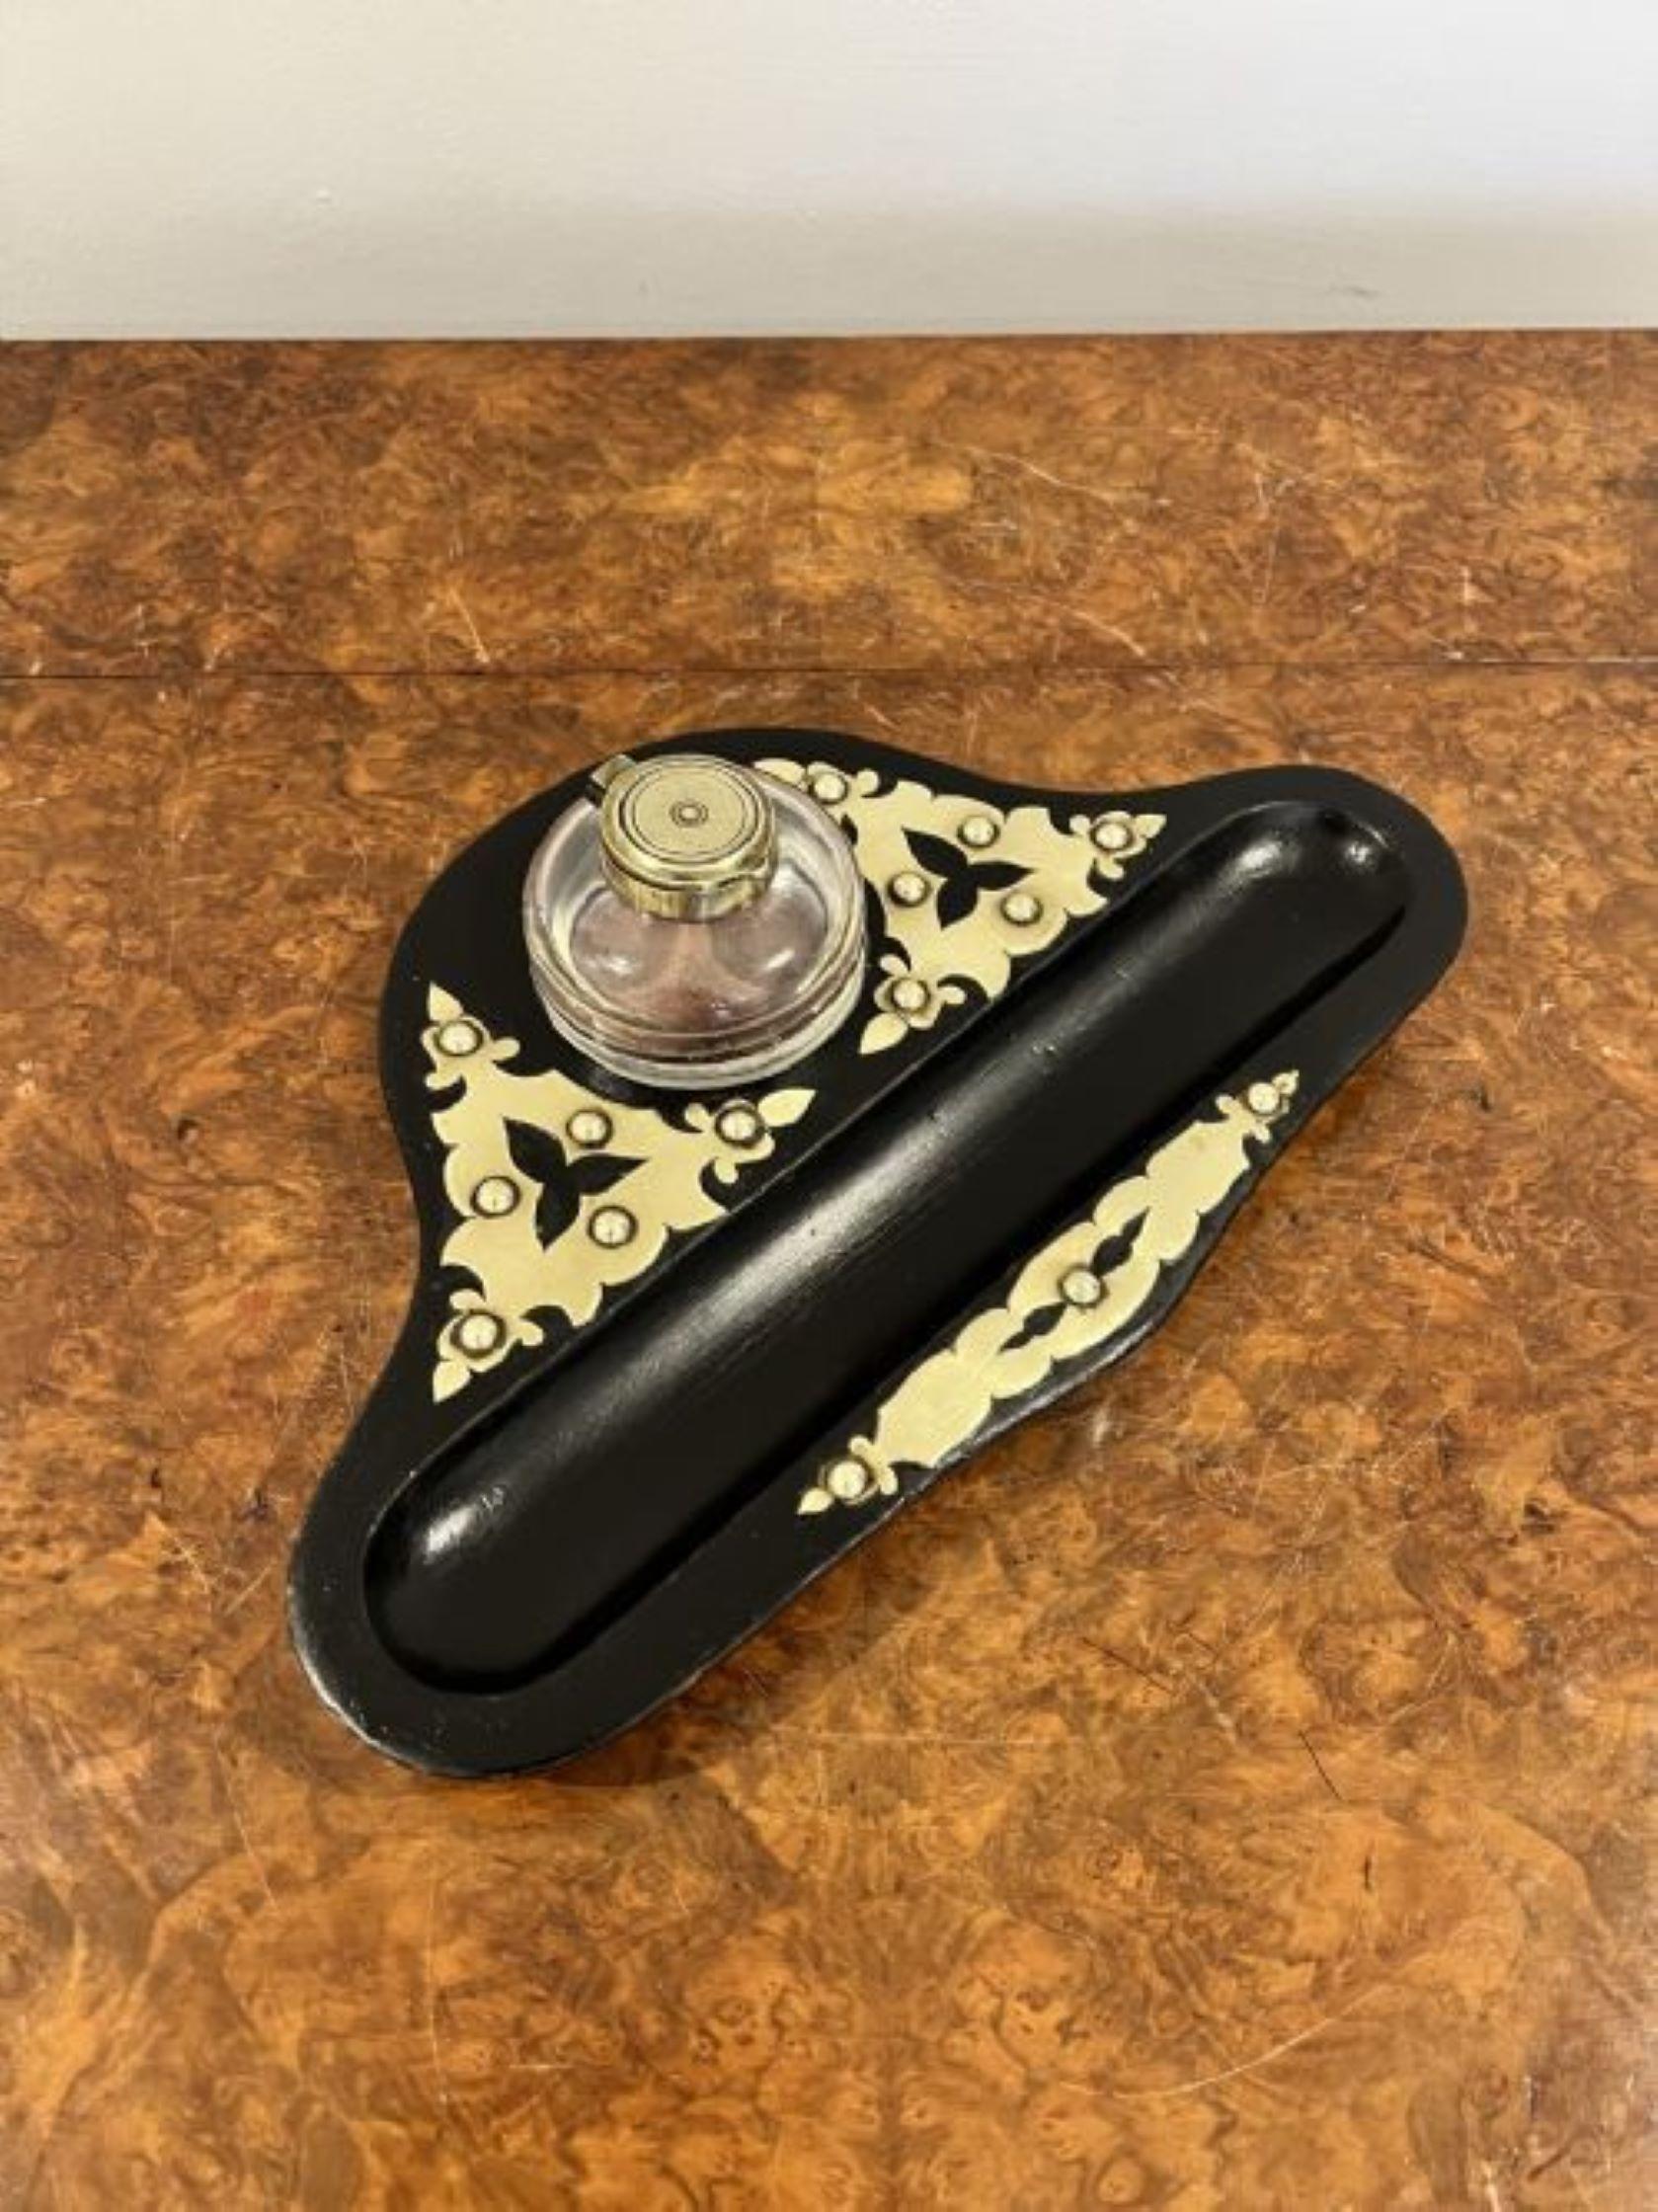 Antique Victorian quality ebonised and brass desk set having a quality ebonised and ornate brass desk set with a pen tray and the original glass ink well with a brass top  